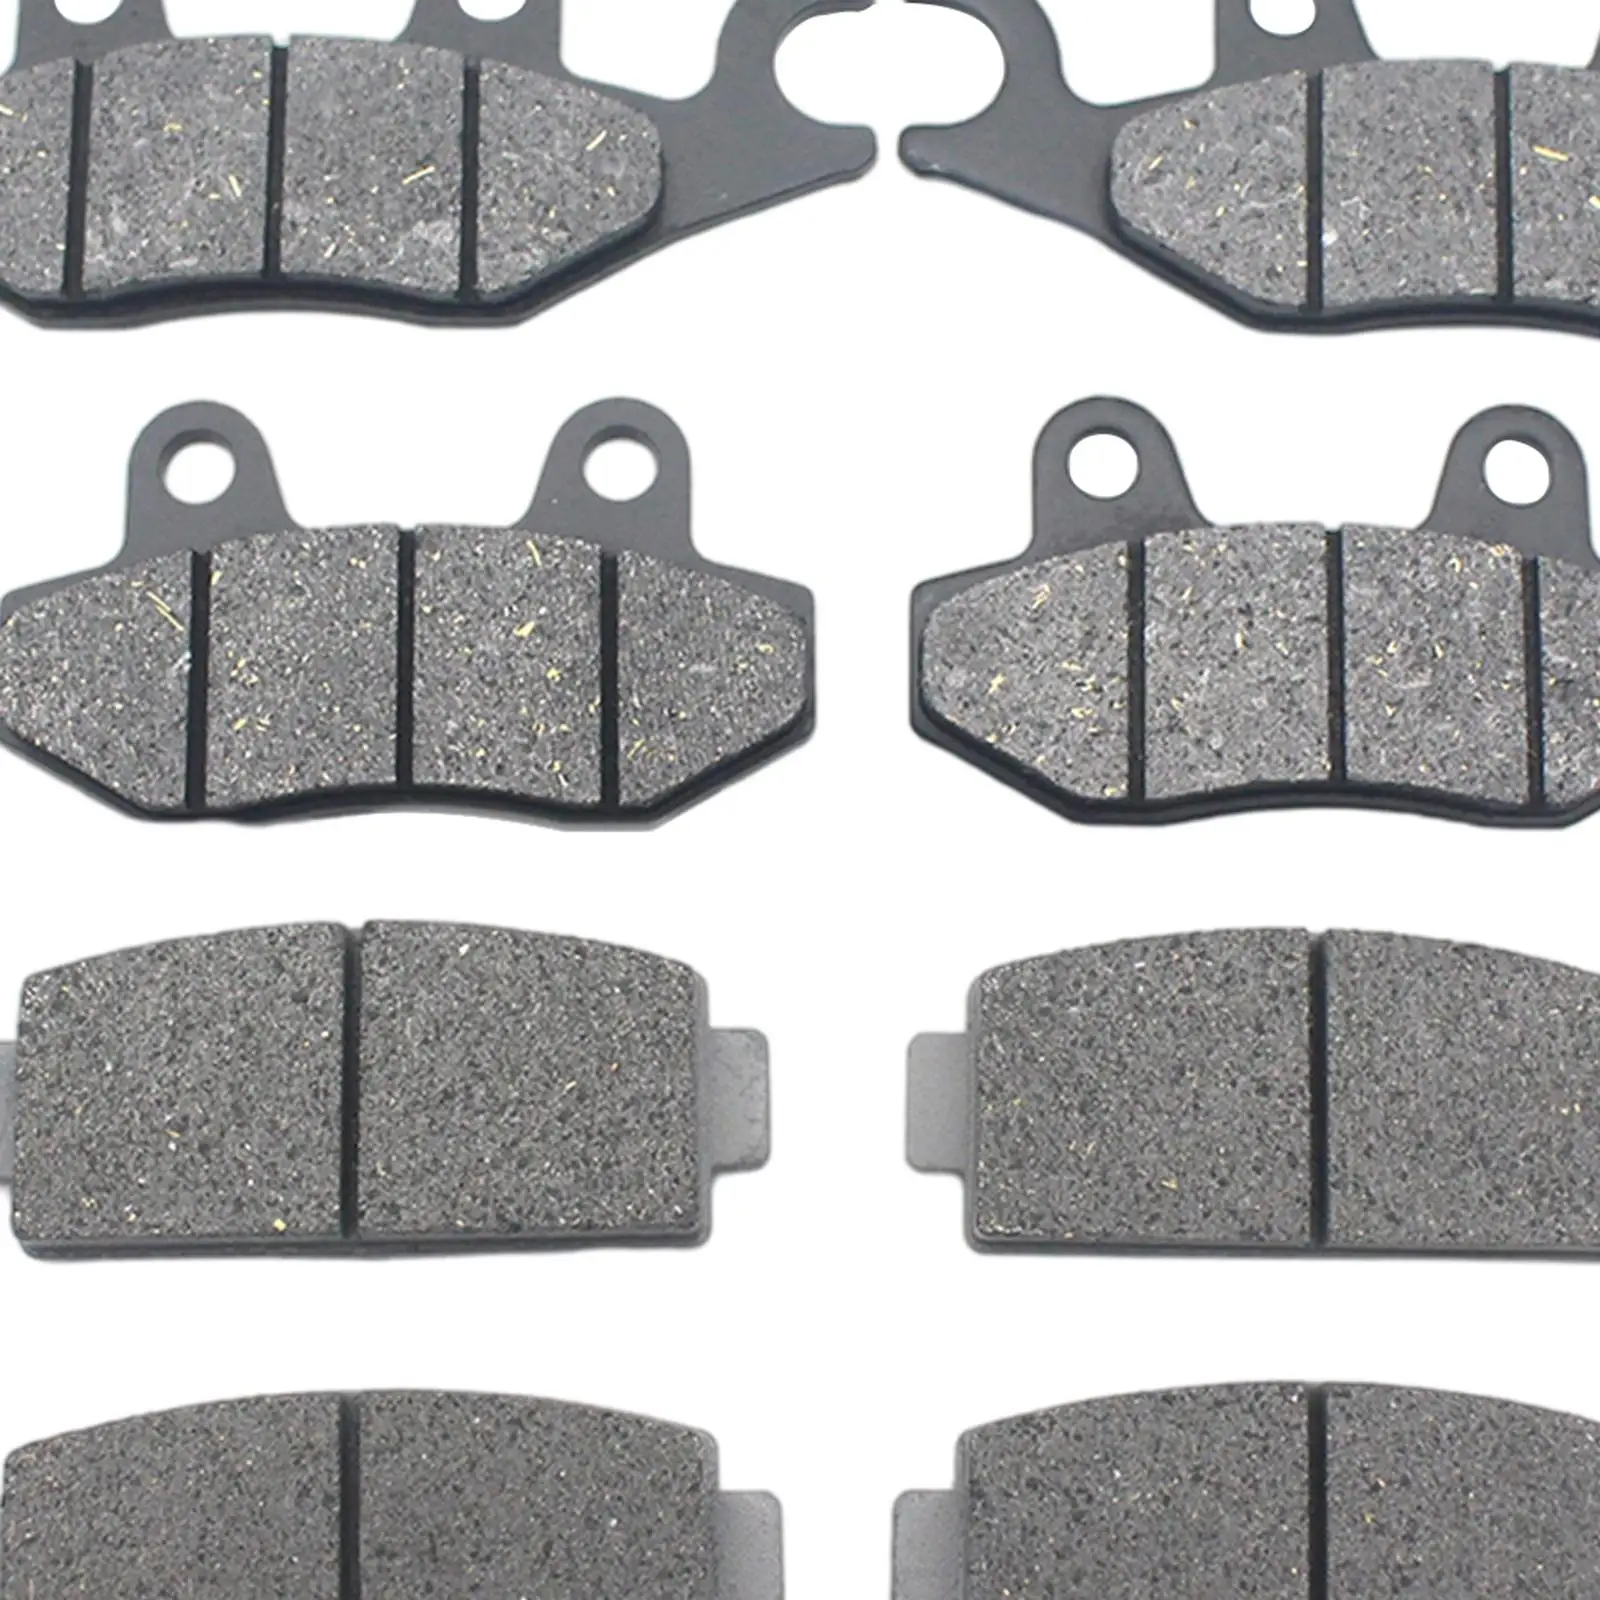 Motorcycle Brake Pads Replacement Automotive Front Rear for 